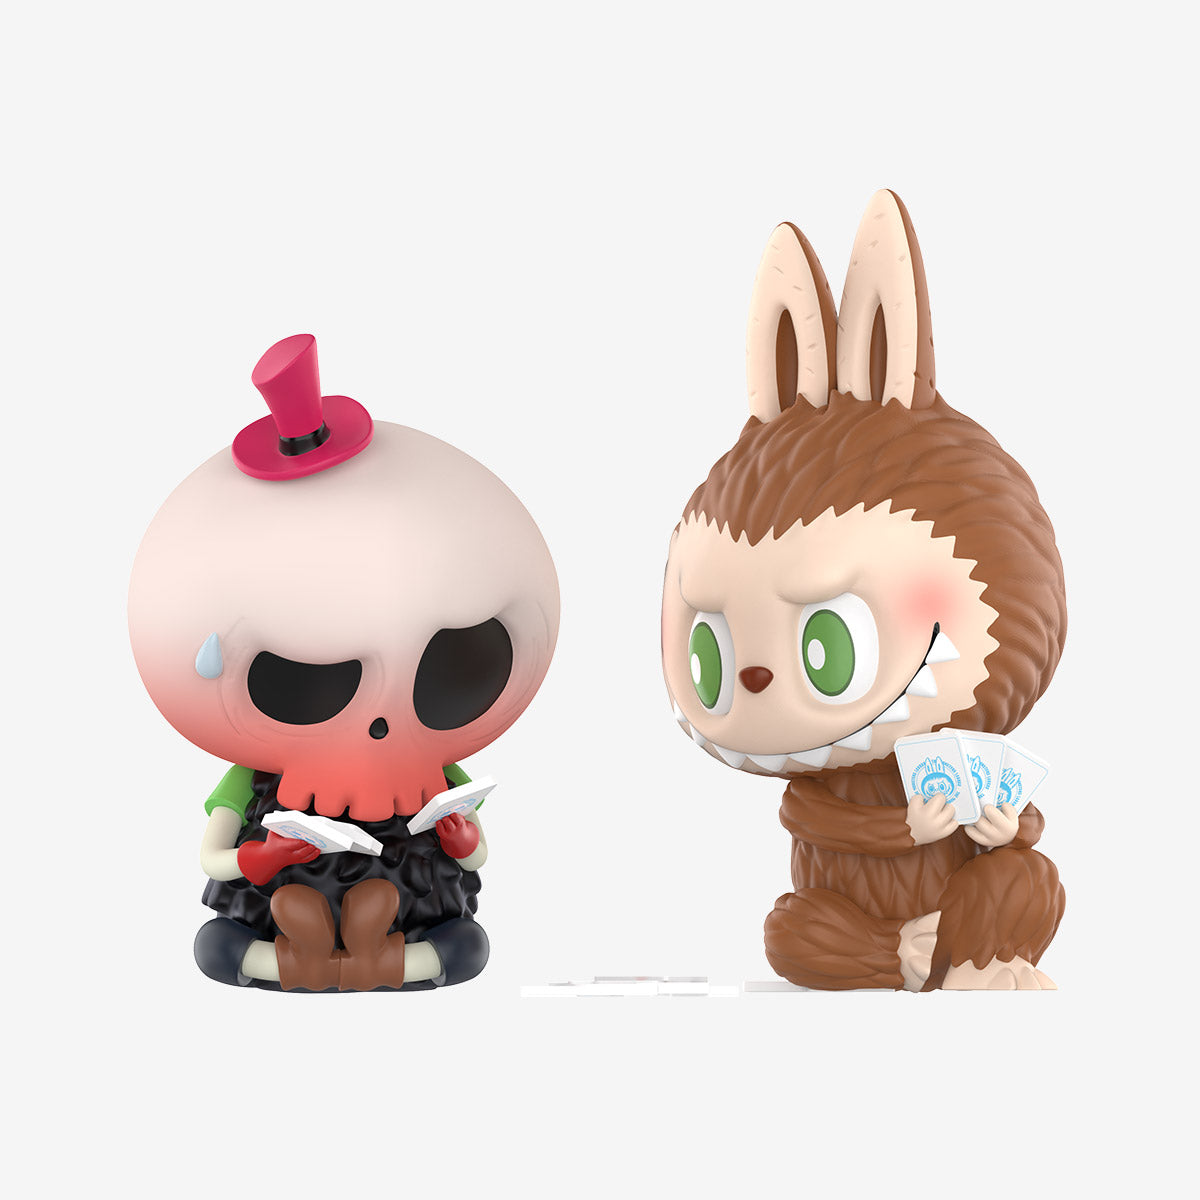 【New】Pop Mart: The Monsters Mischief Diary Series Figure